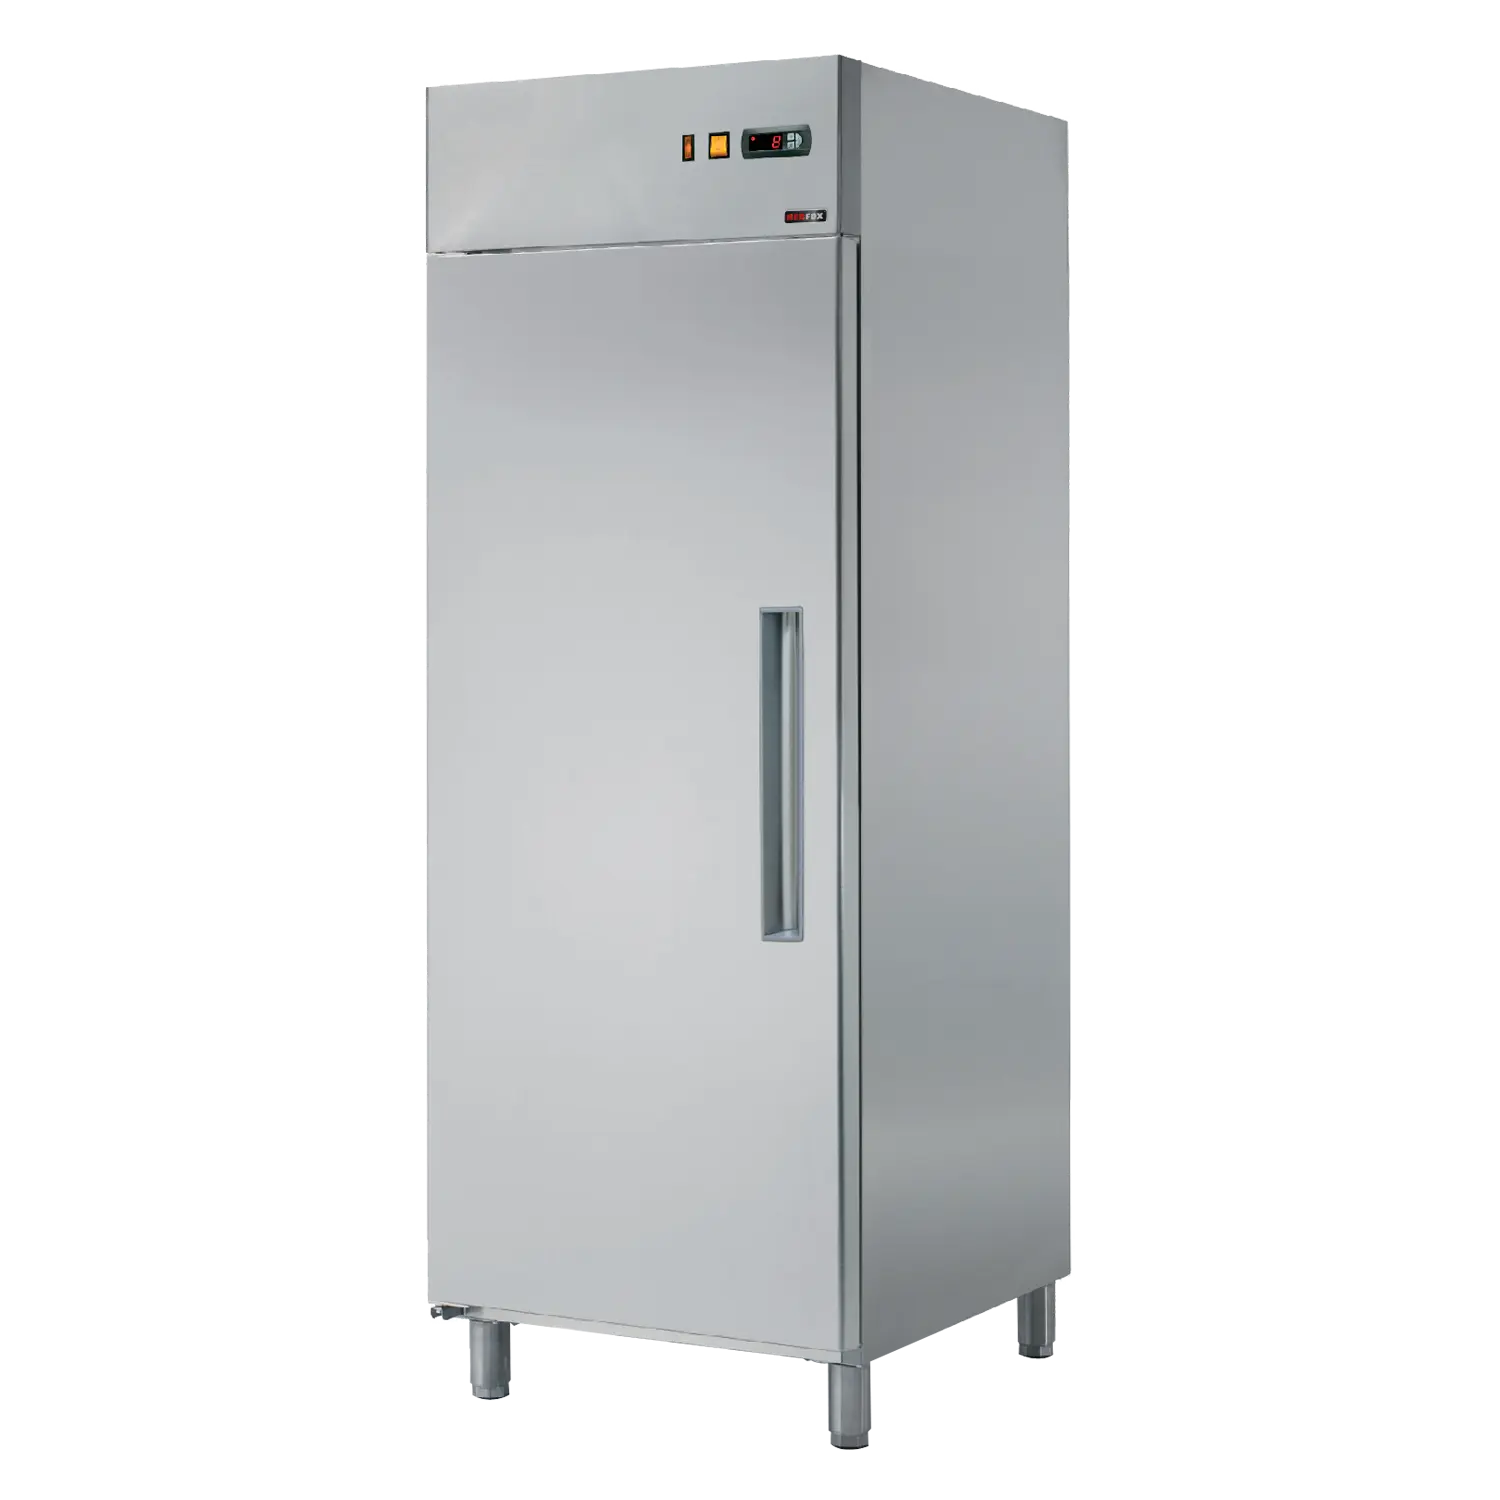 Cooling cabinet 700 l GN 2/1, stainless steel, right door | REDFOX - RT 700 R